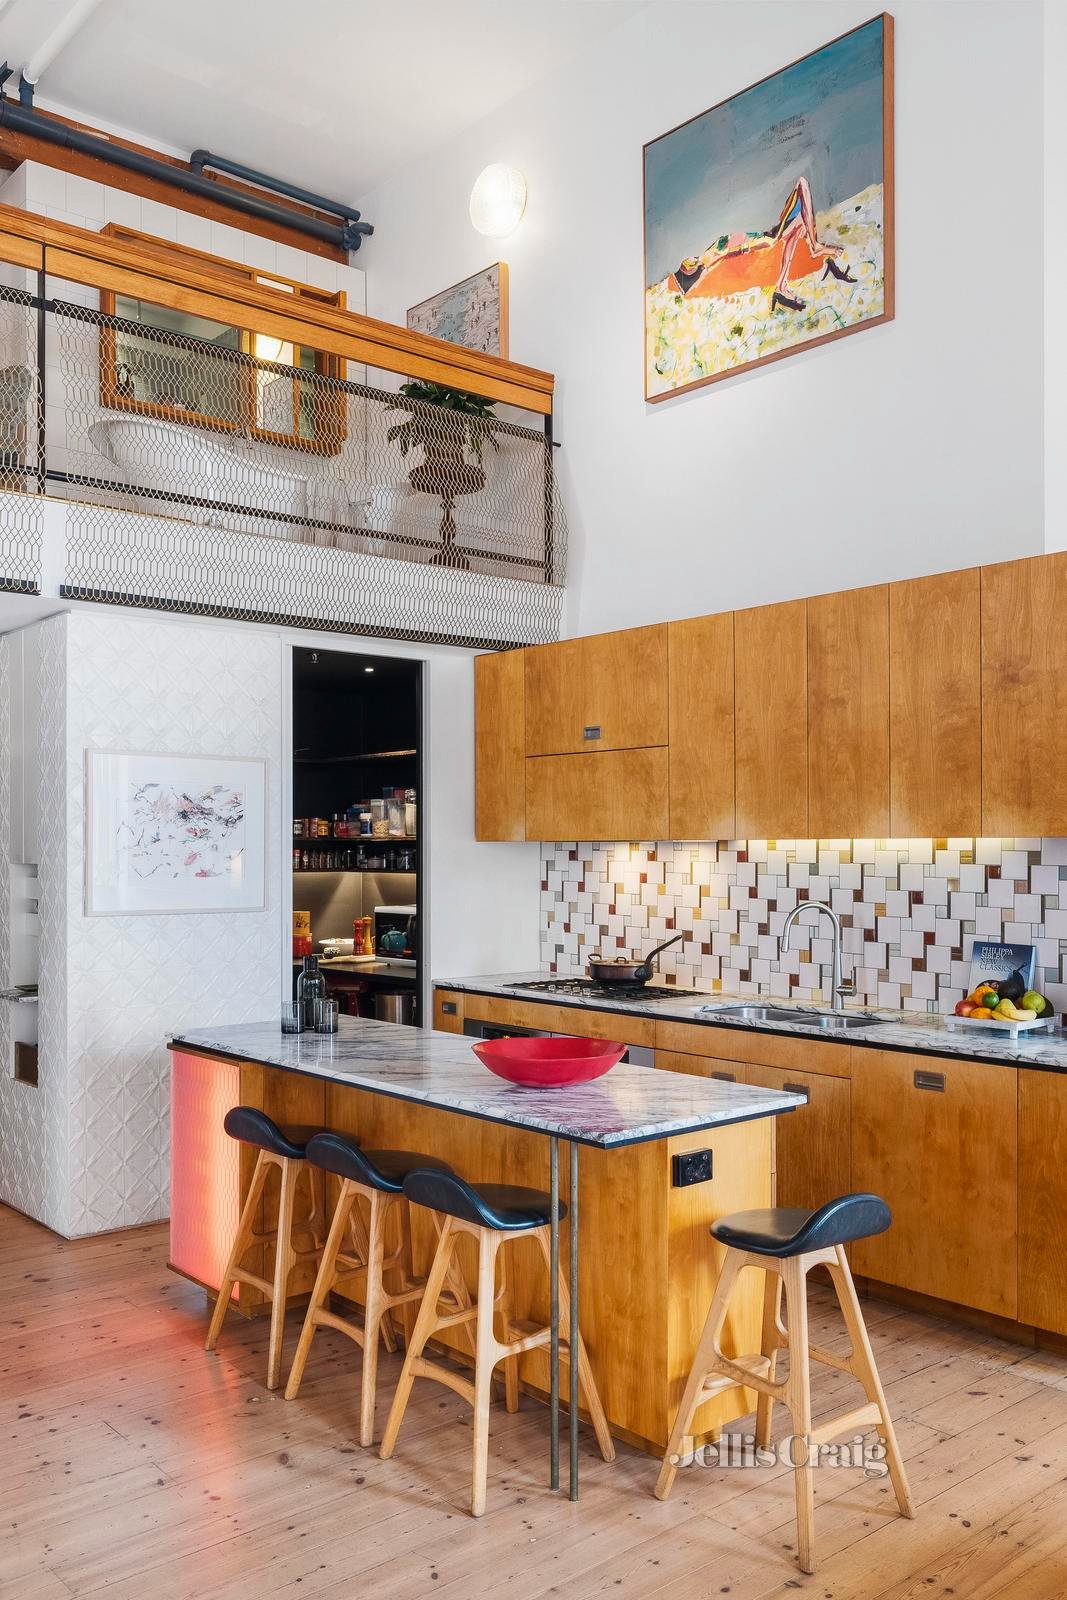 This New York-Style Loft Apartment Is Quintessential Collingwood Cool